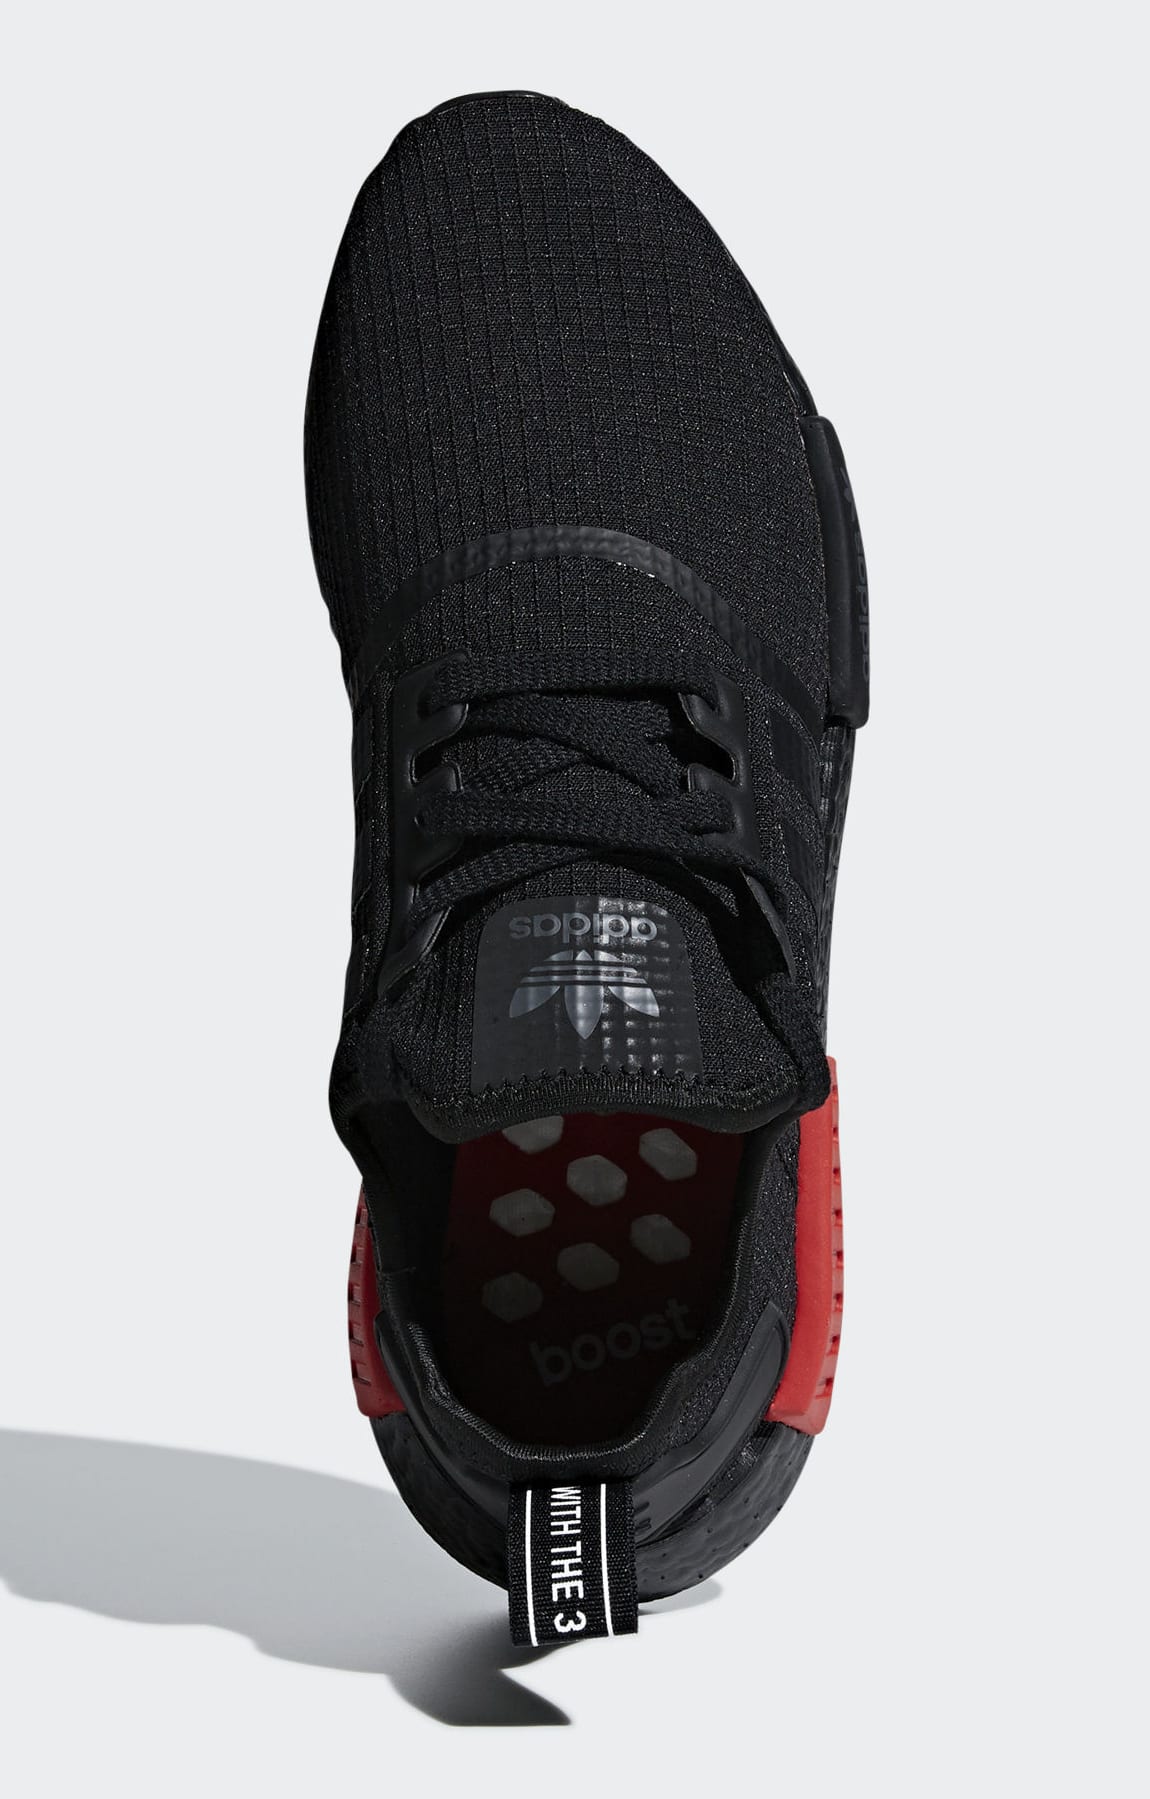 Adidas NMD_R1 'Bred' Release Sept. 6, 2018 B37618 | Sole